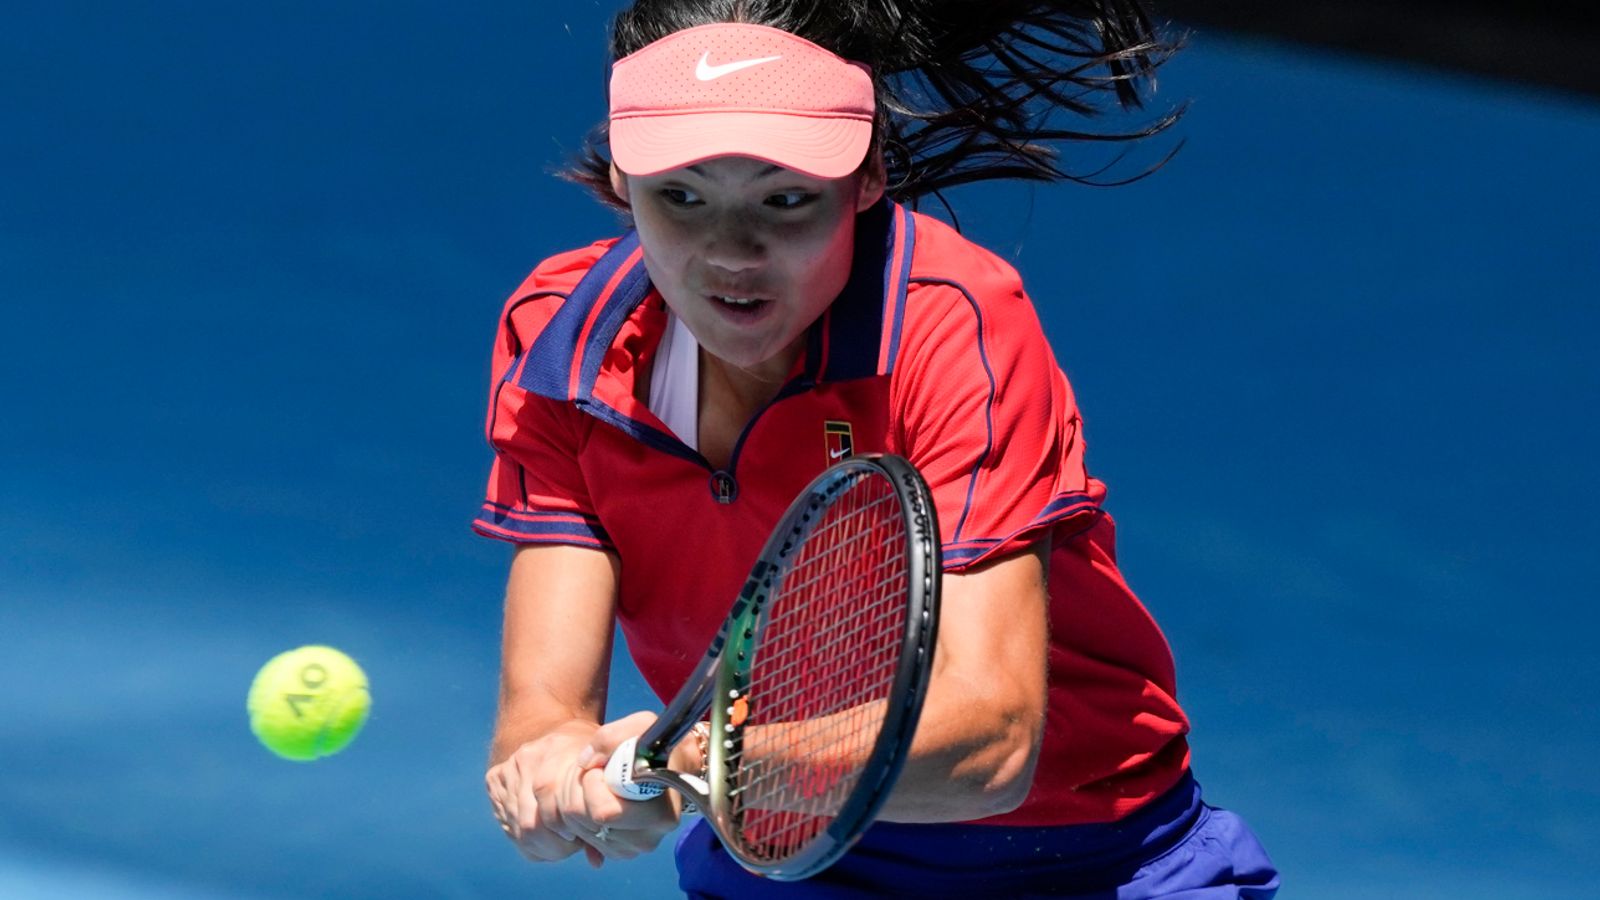 Emma Raducanu jokes about Australian Open hype and pointed advert before Sloane Stephens test